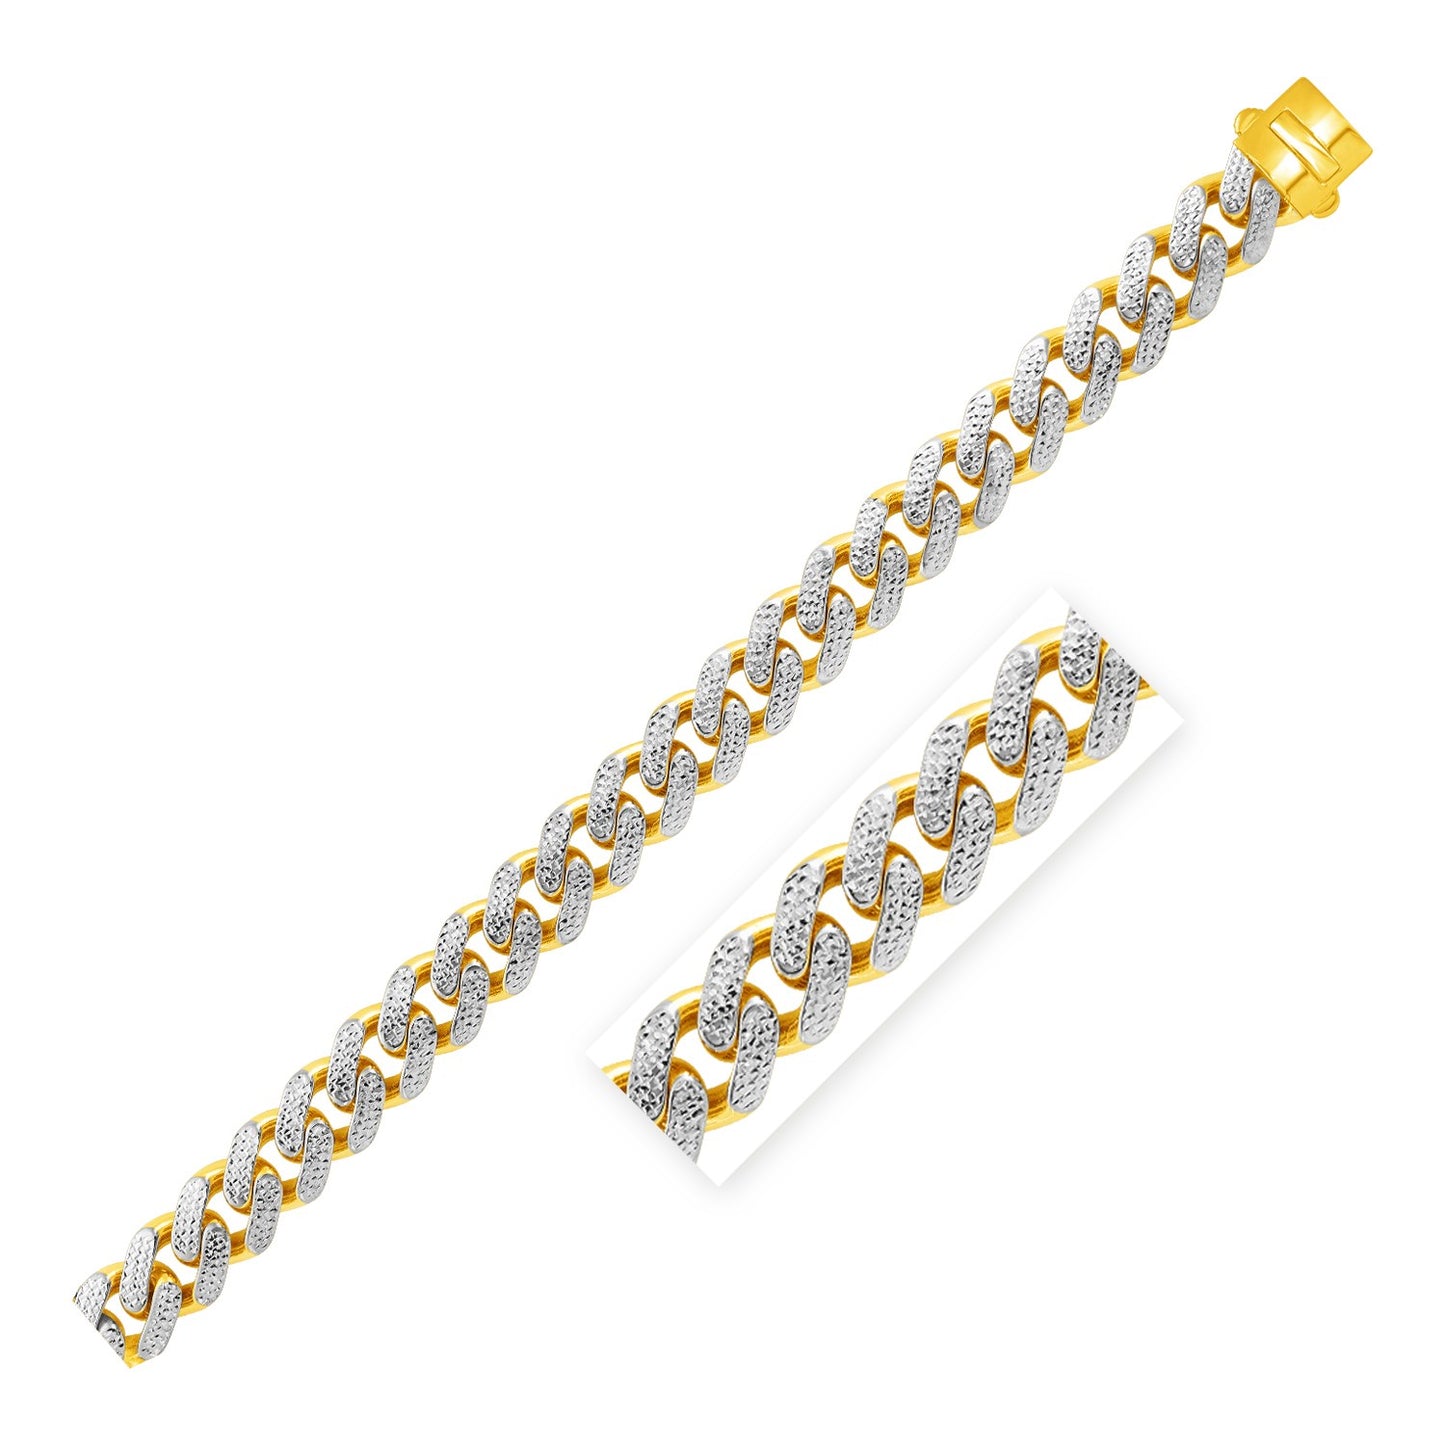 14k Two Tone Gold 8 1/2 inch Wide Curb Chain Bracelet with White Pave